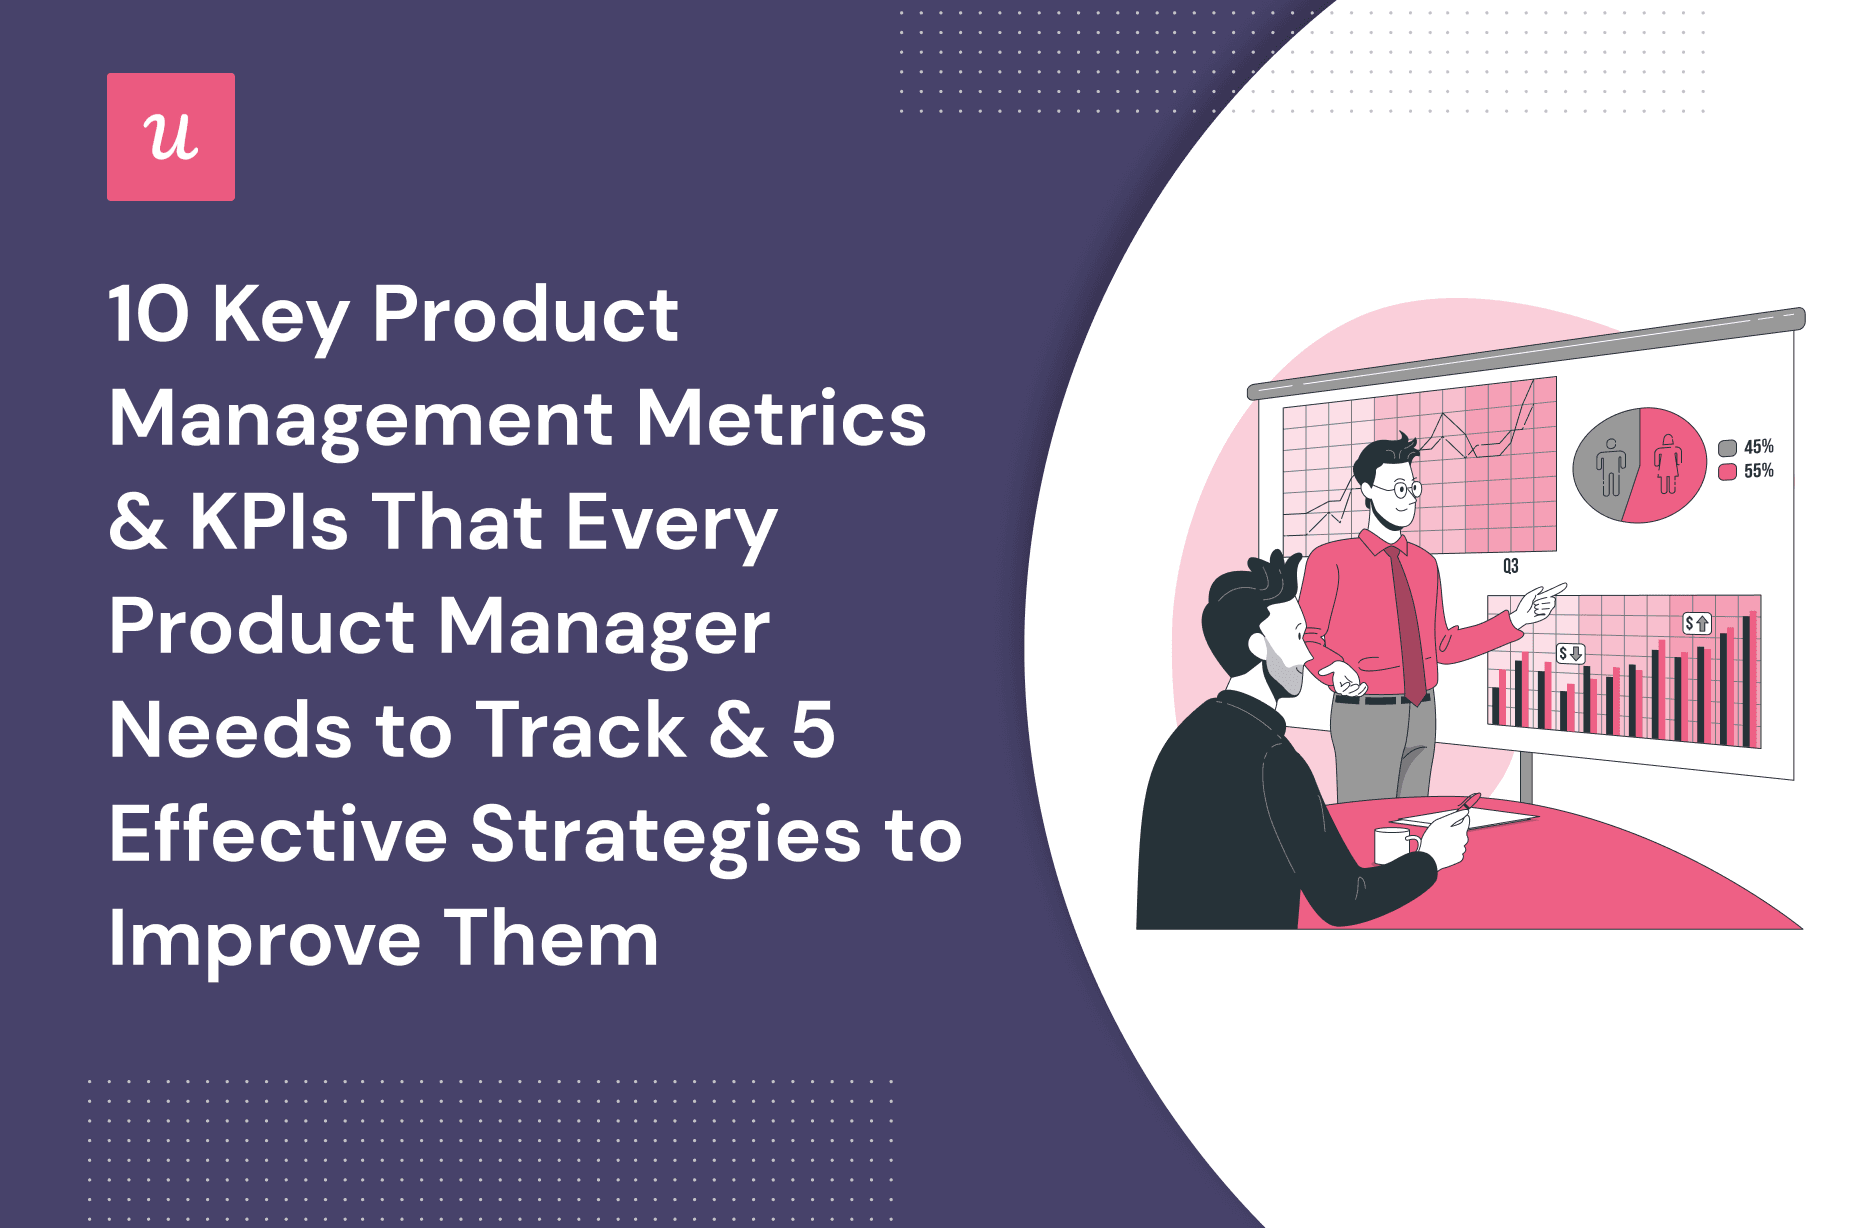 10 Key Product Management Metrics & KPIs That Every Product Manager Needs To Track & 5 Effective Strategies To Improve Them cover